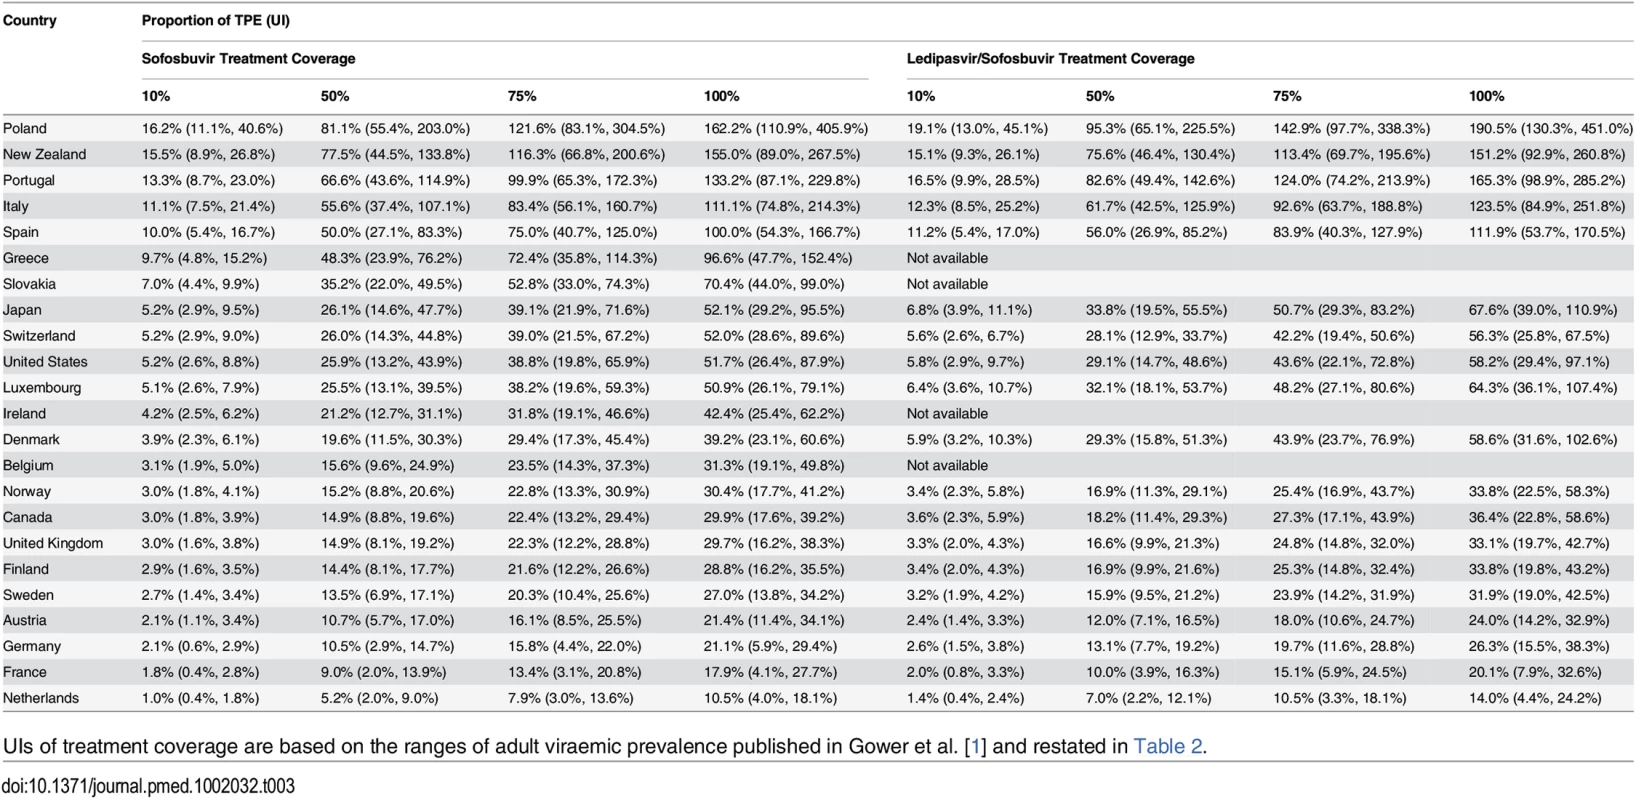 The cost of treatment coverage with sofosbuvir or ledipasvir/sofosbuvir of different proportions of patients with viraemic HCV infection (for point estimates and uncertainty intervals) as a proportion of PPP-adjusted current total pharmaceutical expenditure.